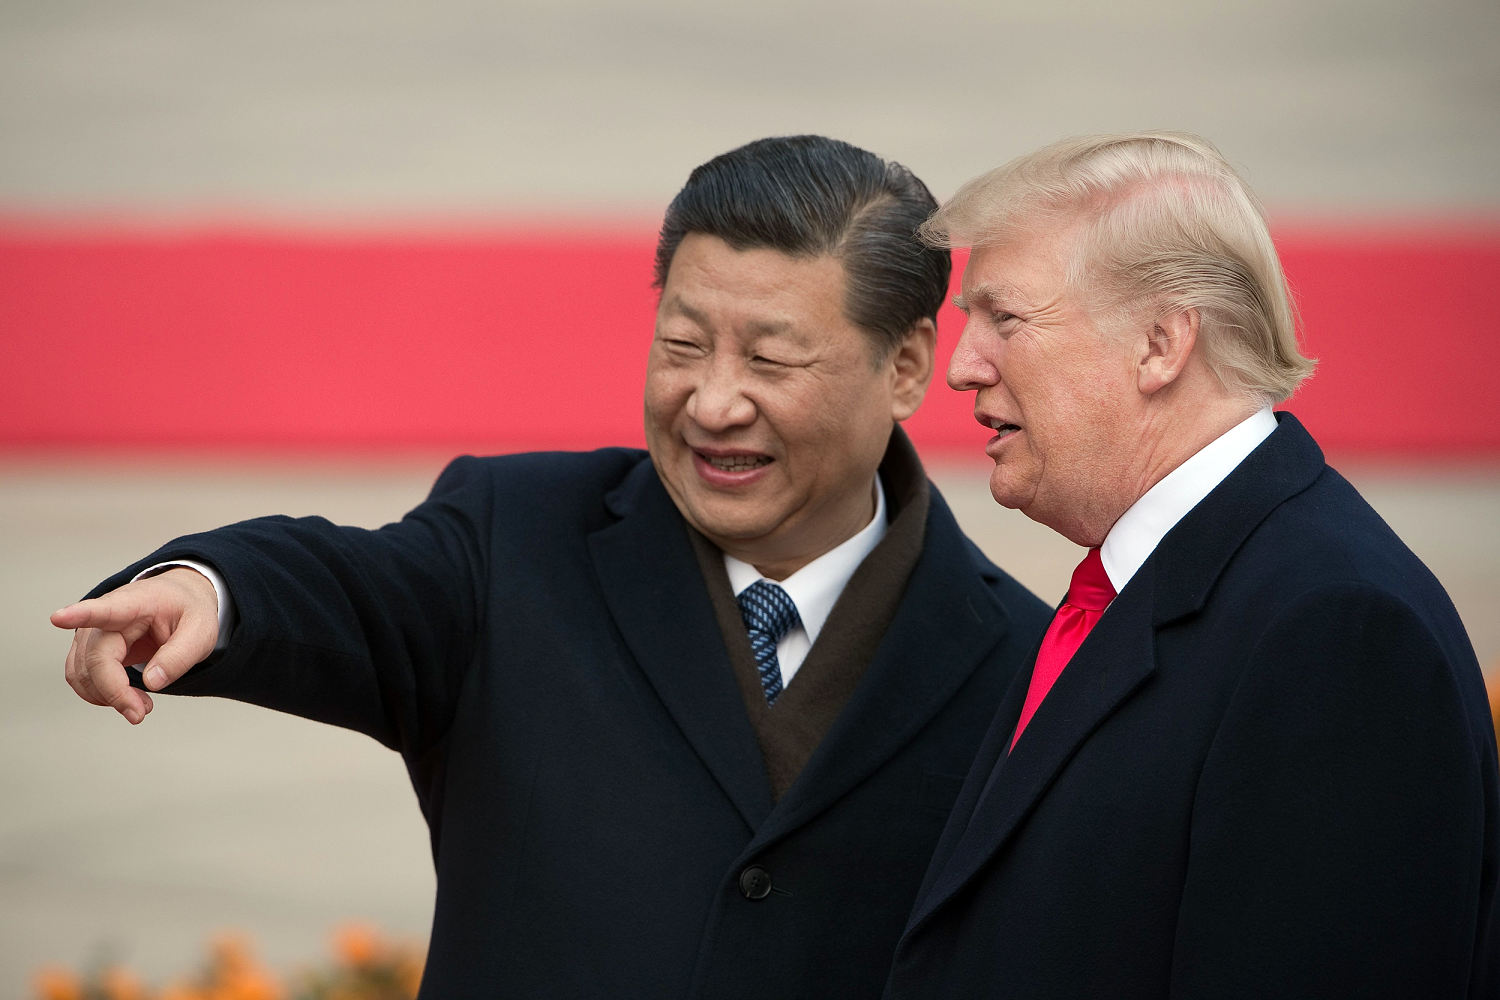 Why Trump’s accusations about China can (and should) backfire